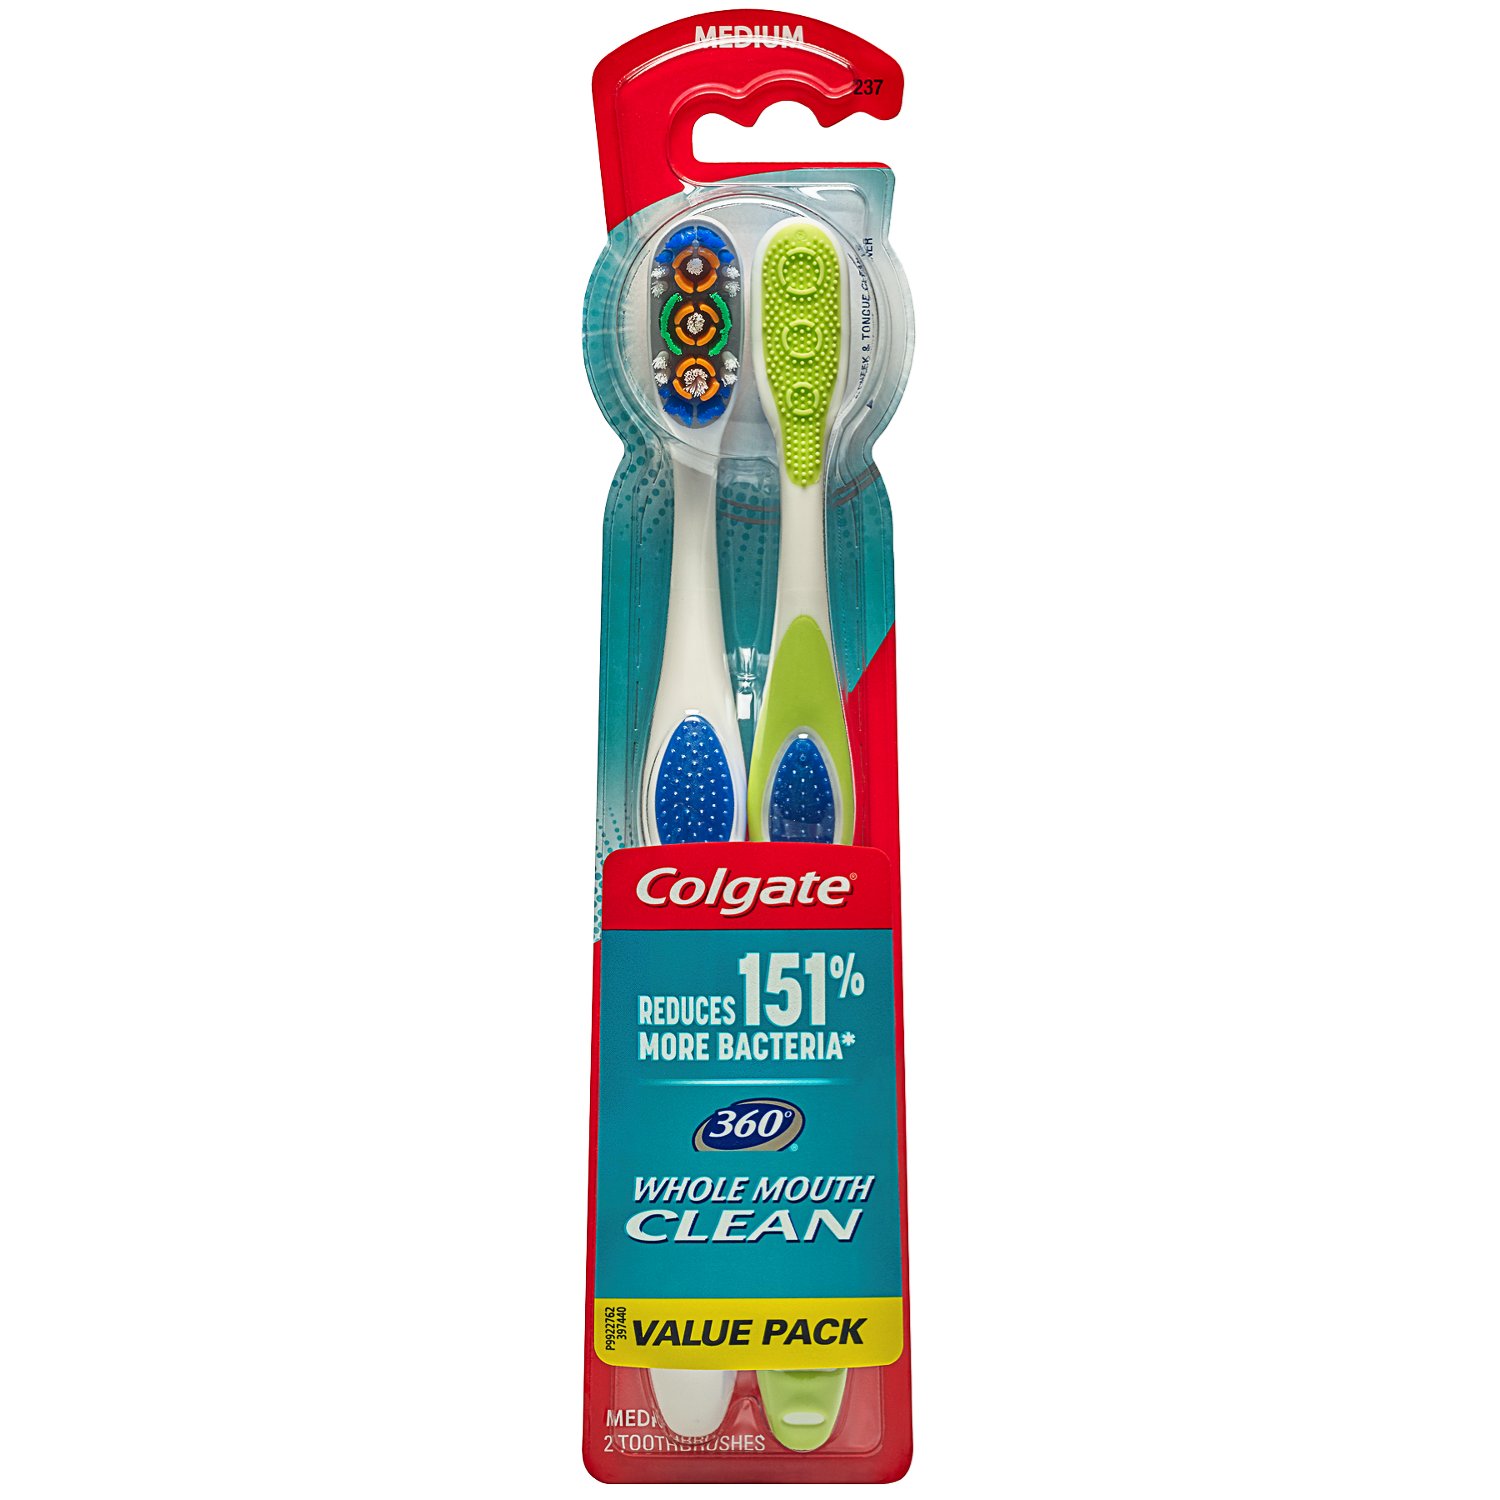 Colgate 360 Manual Toothbrush with Tongue and Cheek Cleaner, Medium, 2 Ct